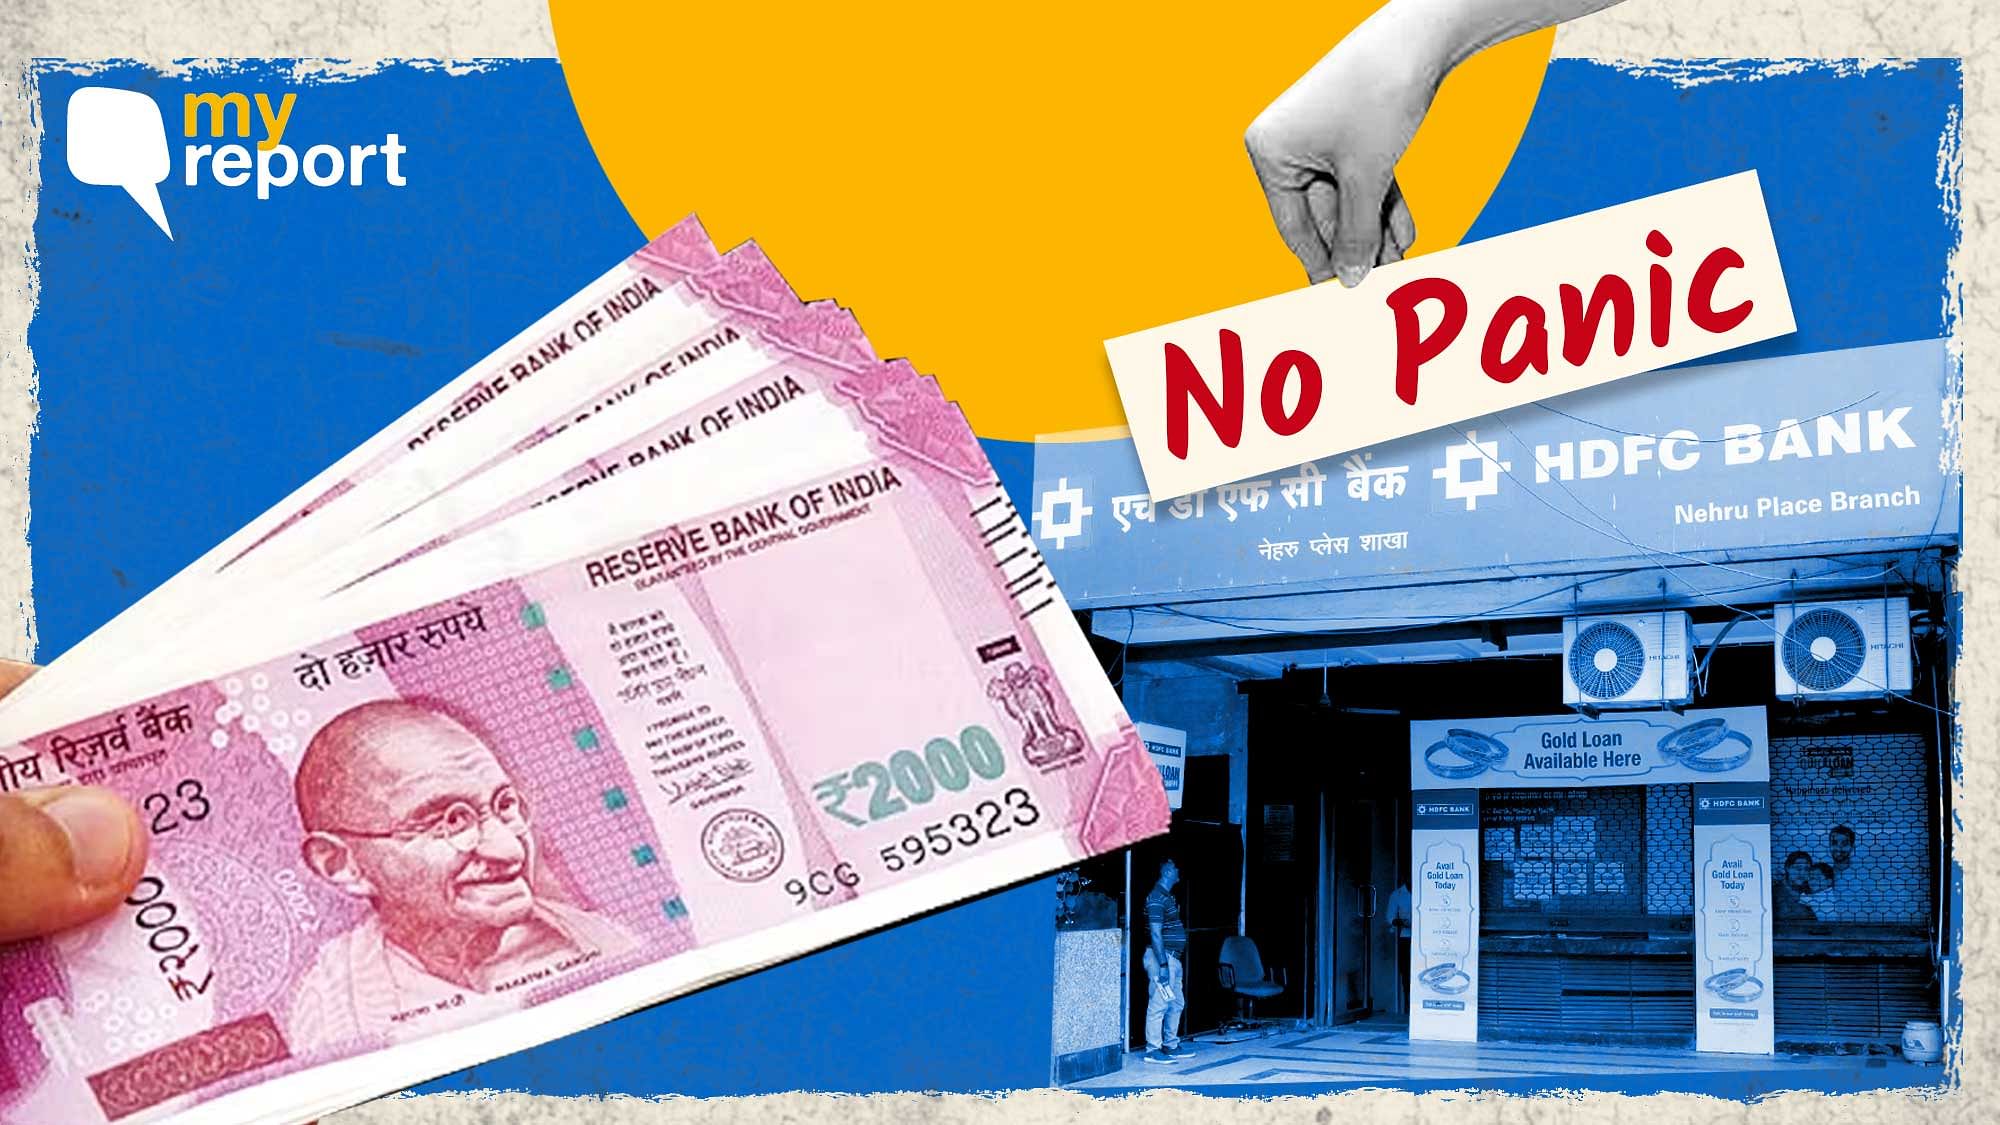 <div class="paragraphs"><p>On Friday, 19 May, the Reserve Bank Of India announced the withdrawal of Rs 2,000 denomination bank notes from circulation.</p></div>